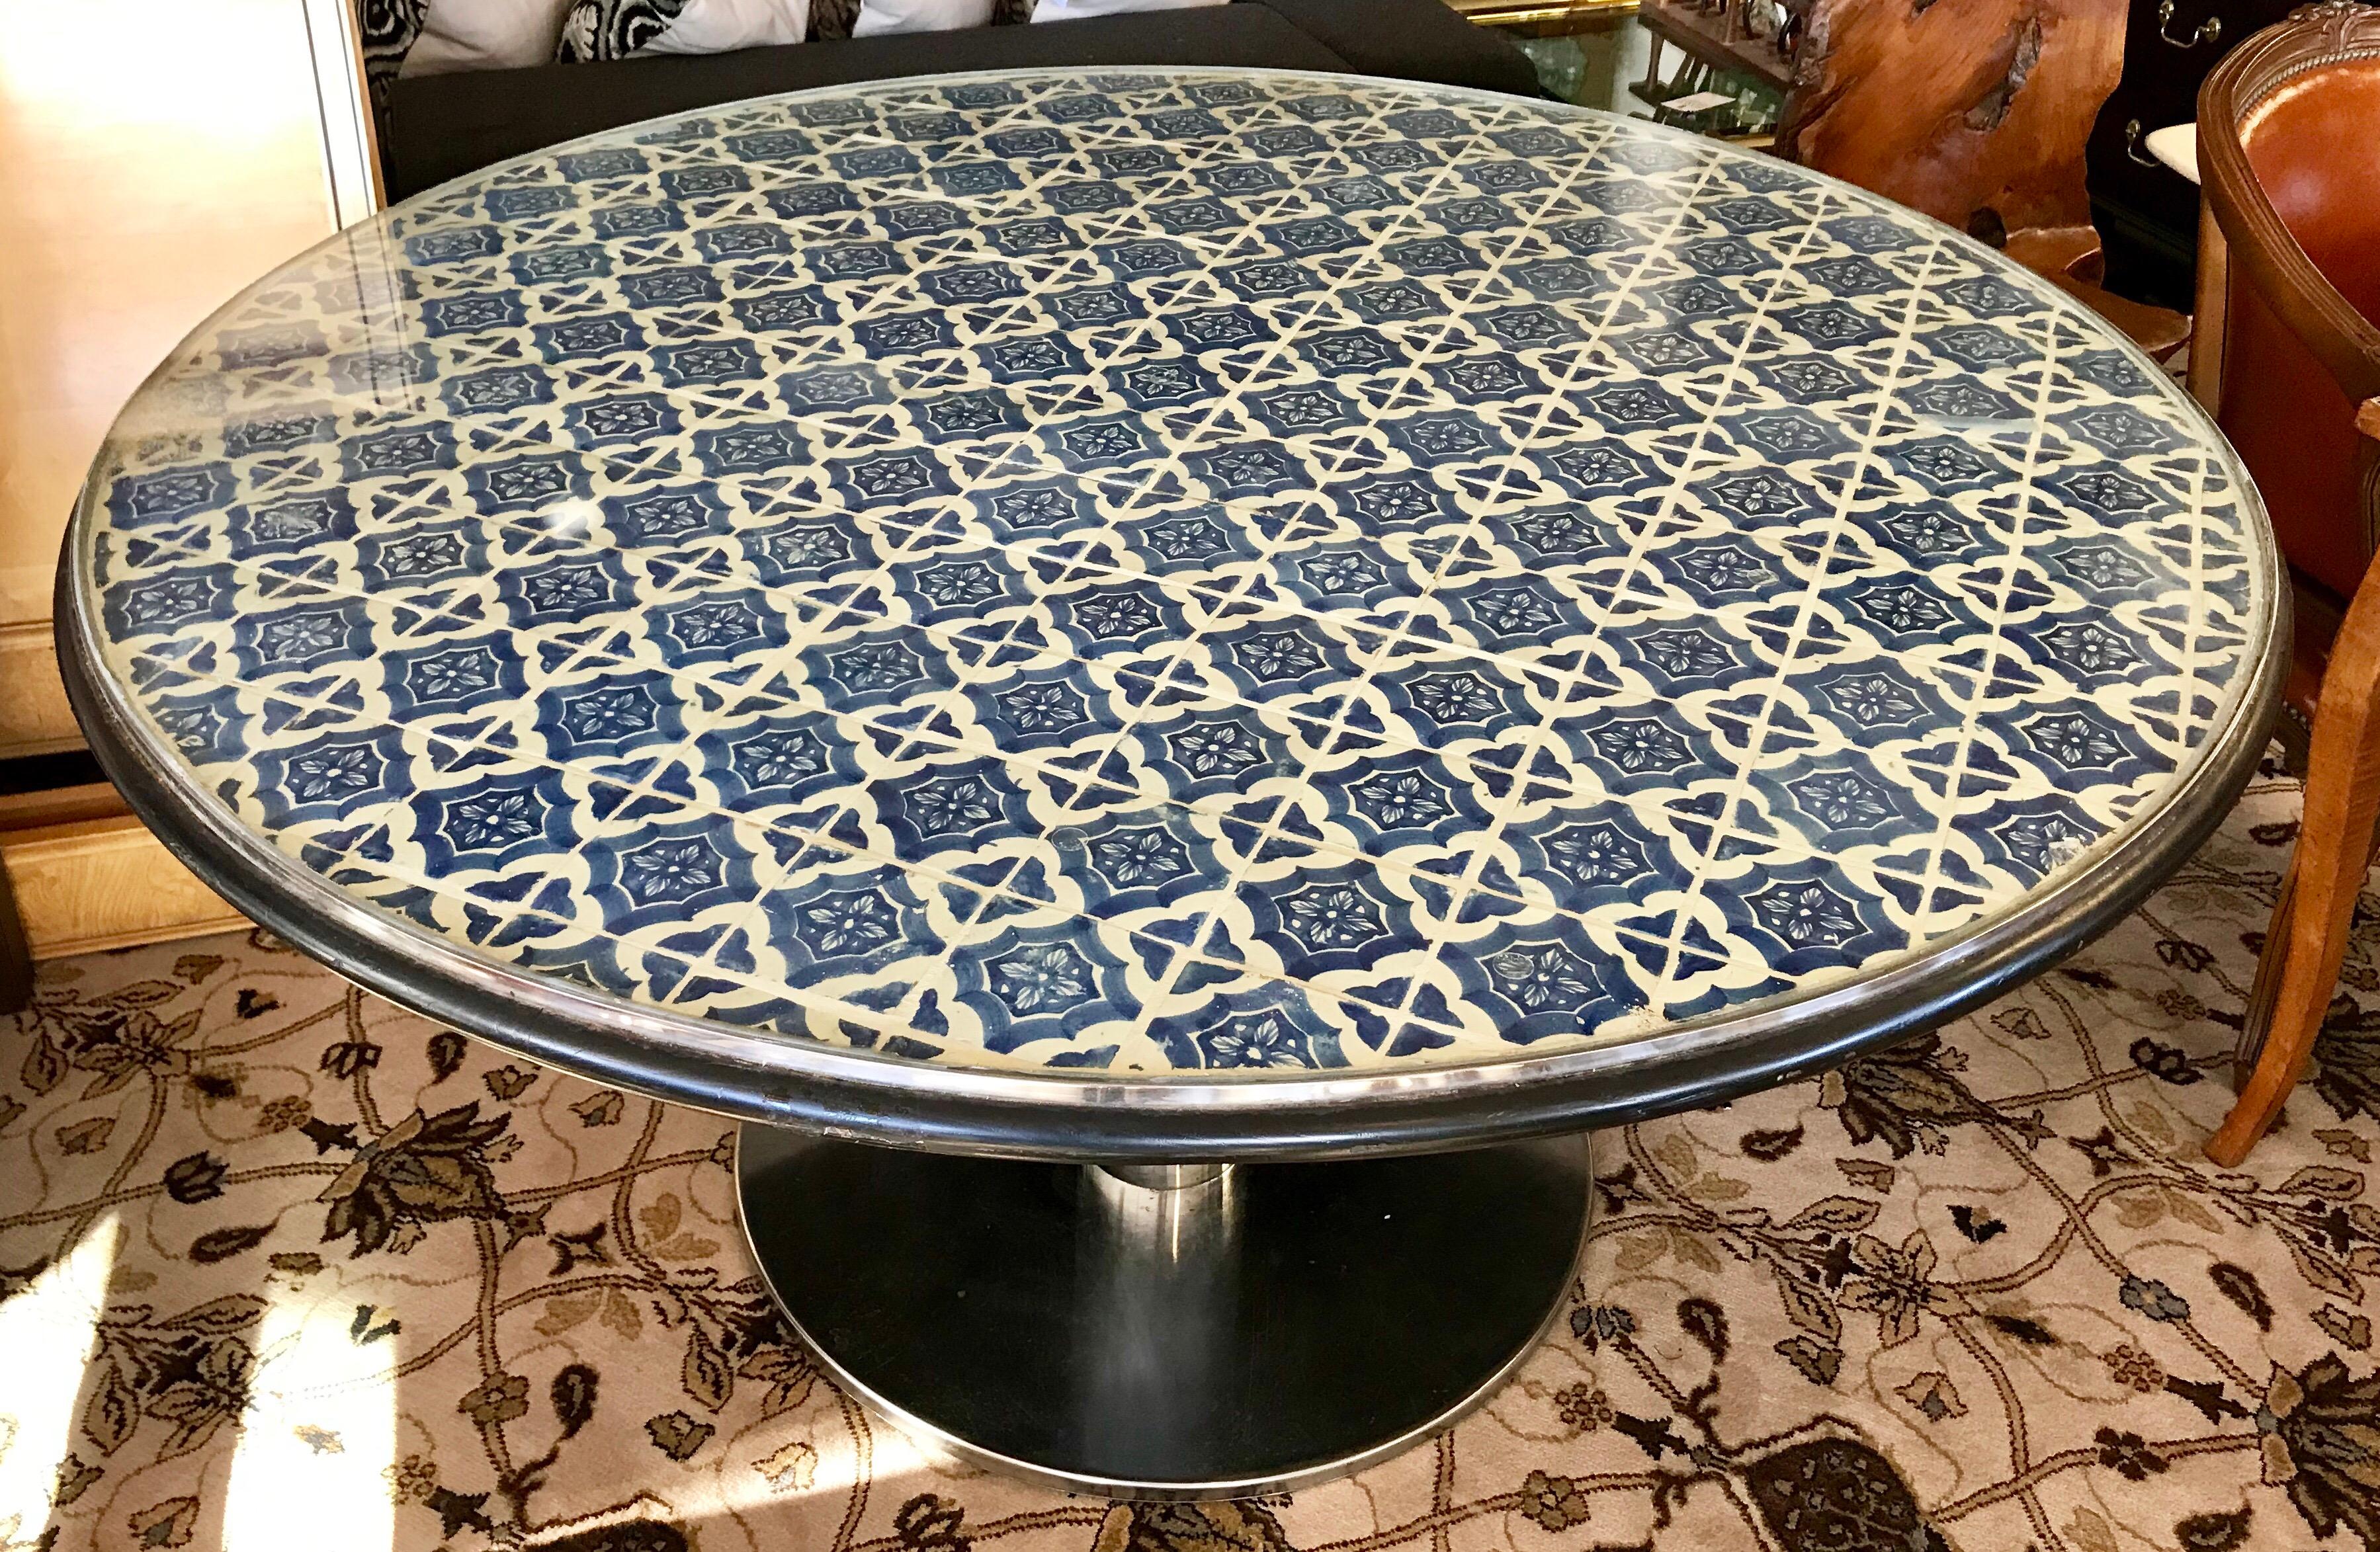 Magnificent custom round tile top table on a steel pedestal base. Top is made of hand painted blue and white Spanish tiles and protected with a glass top. Tiles are fitted inside a steel frame and the edge of table is a black painted wood.  All